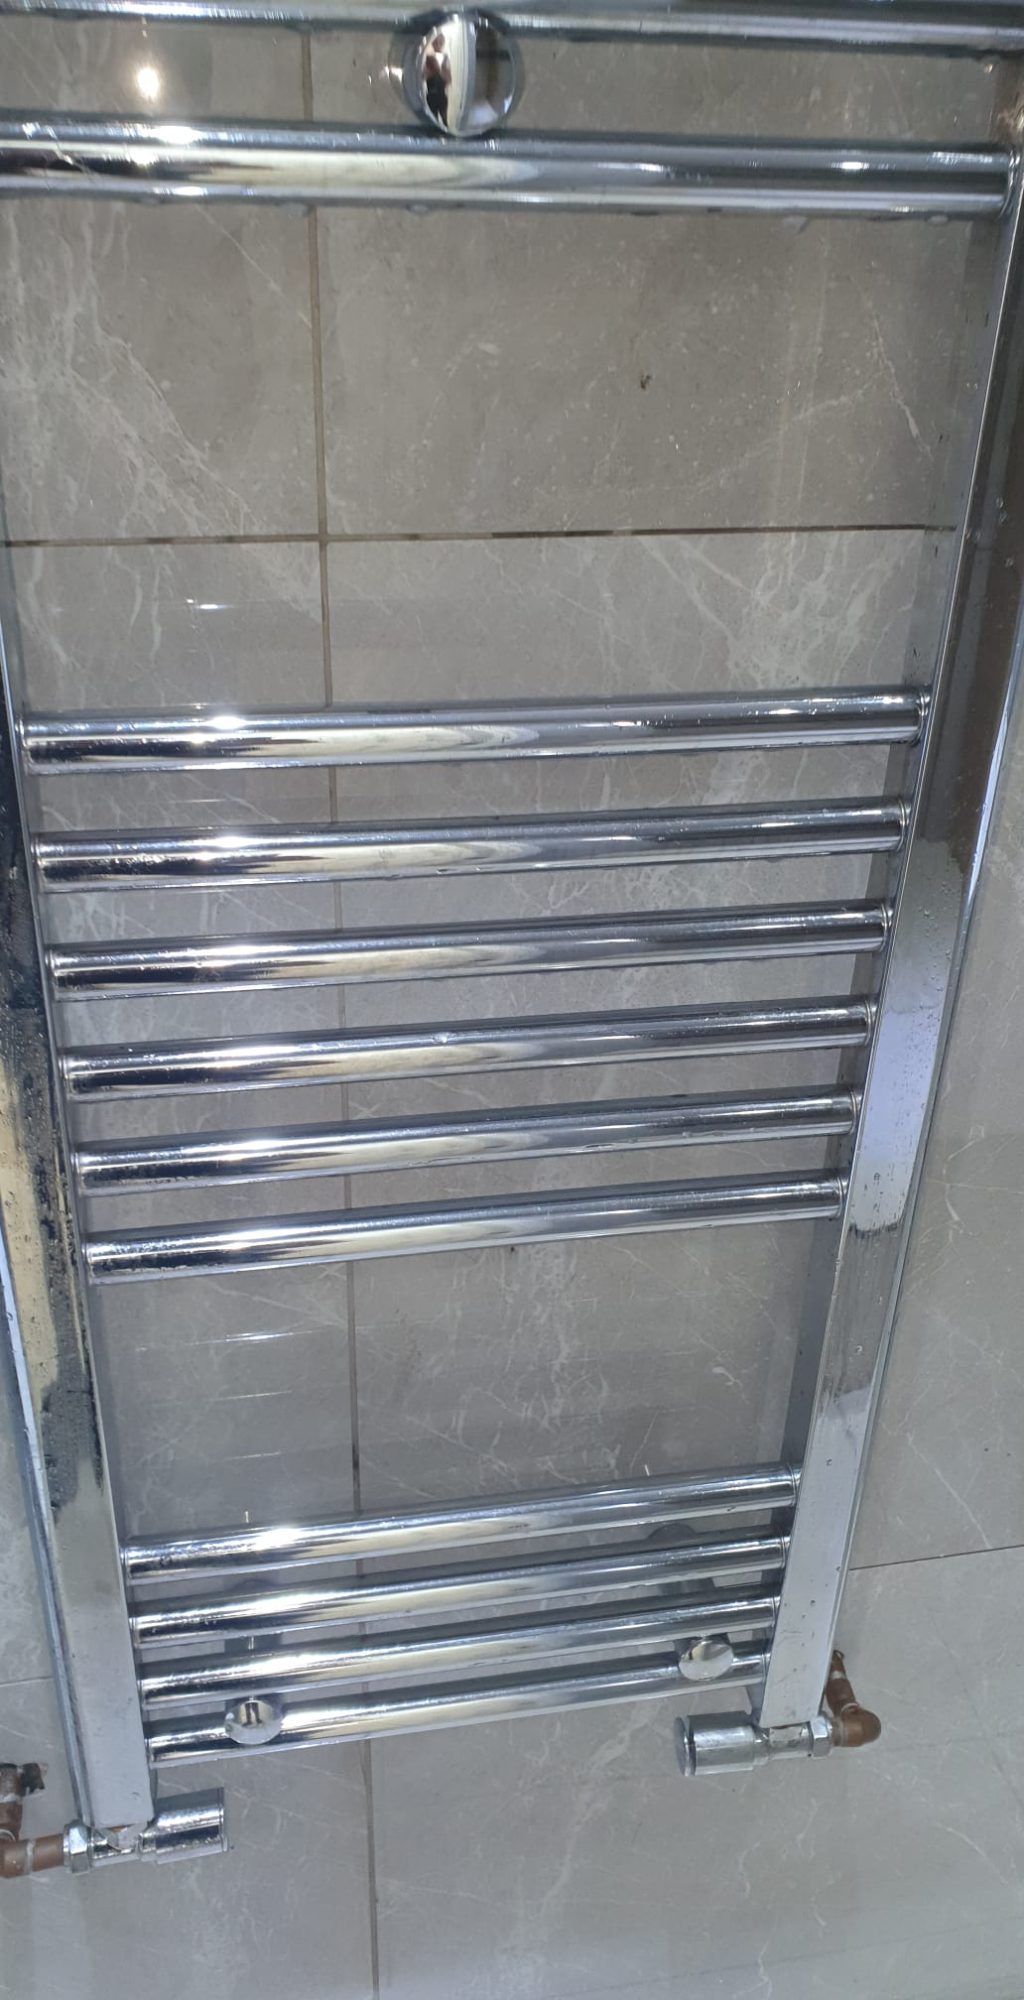 Towel dryer cleaned, polished, and shiny again